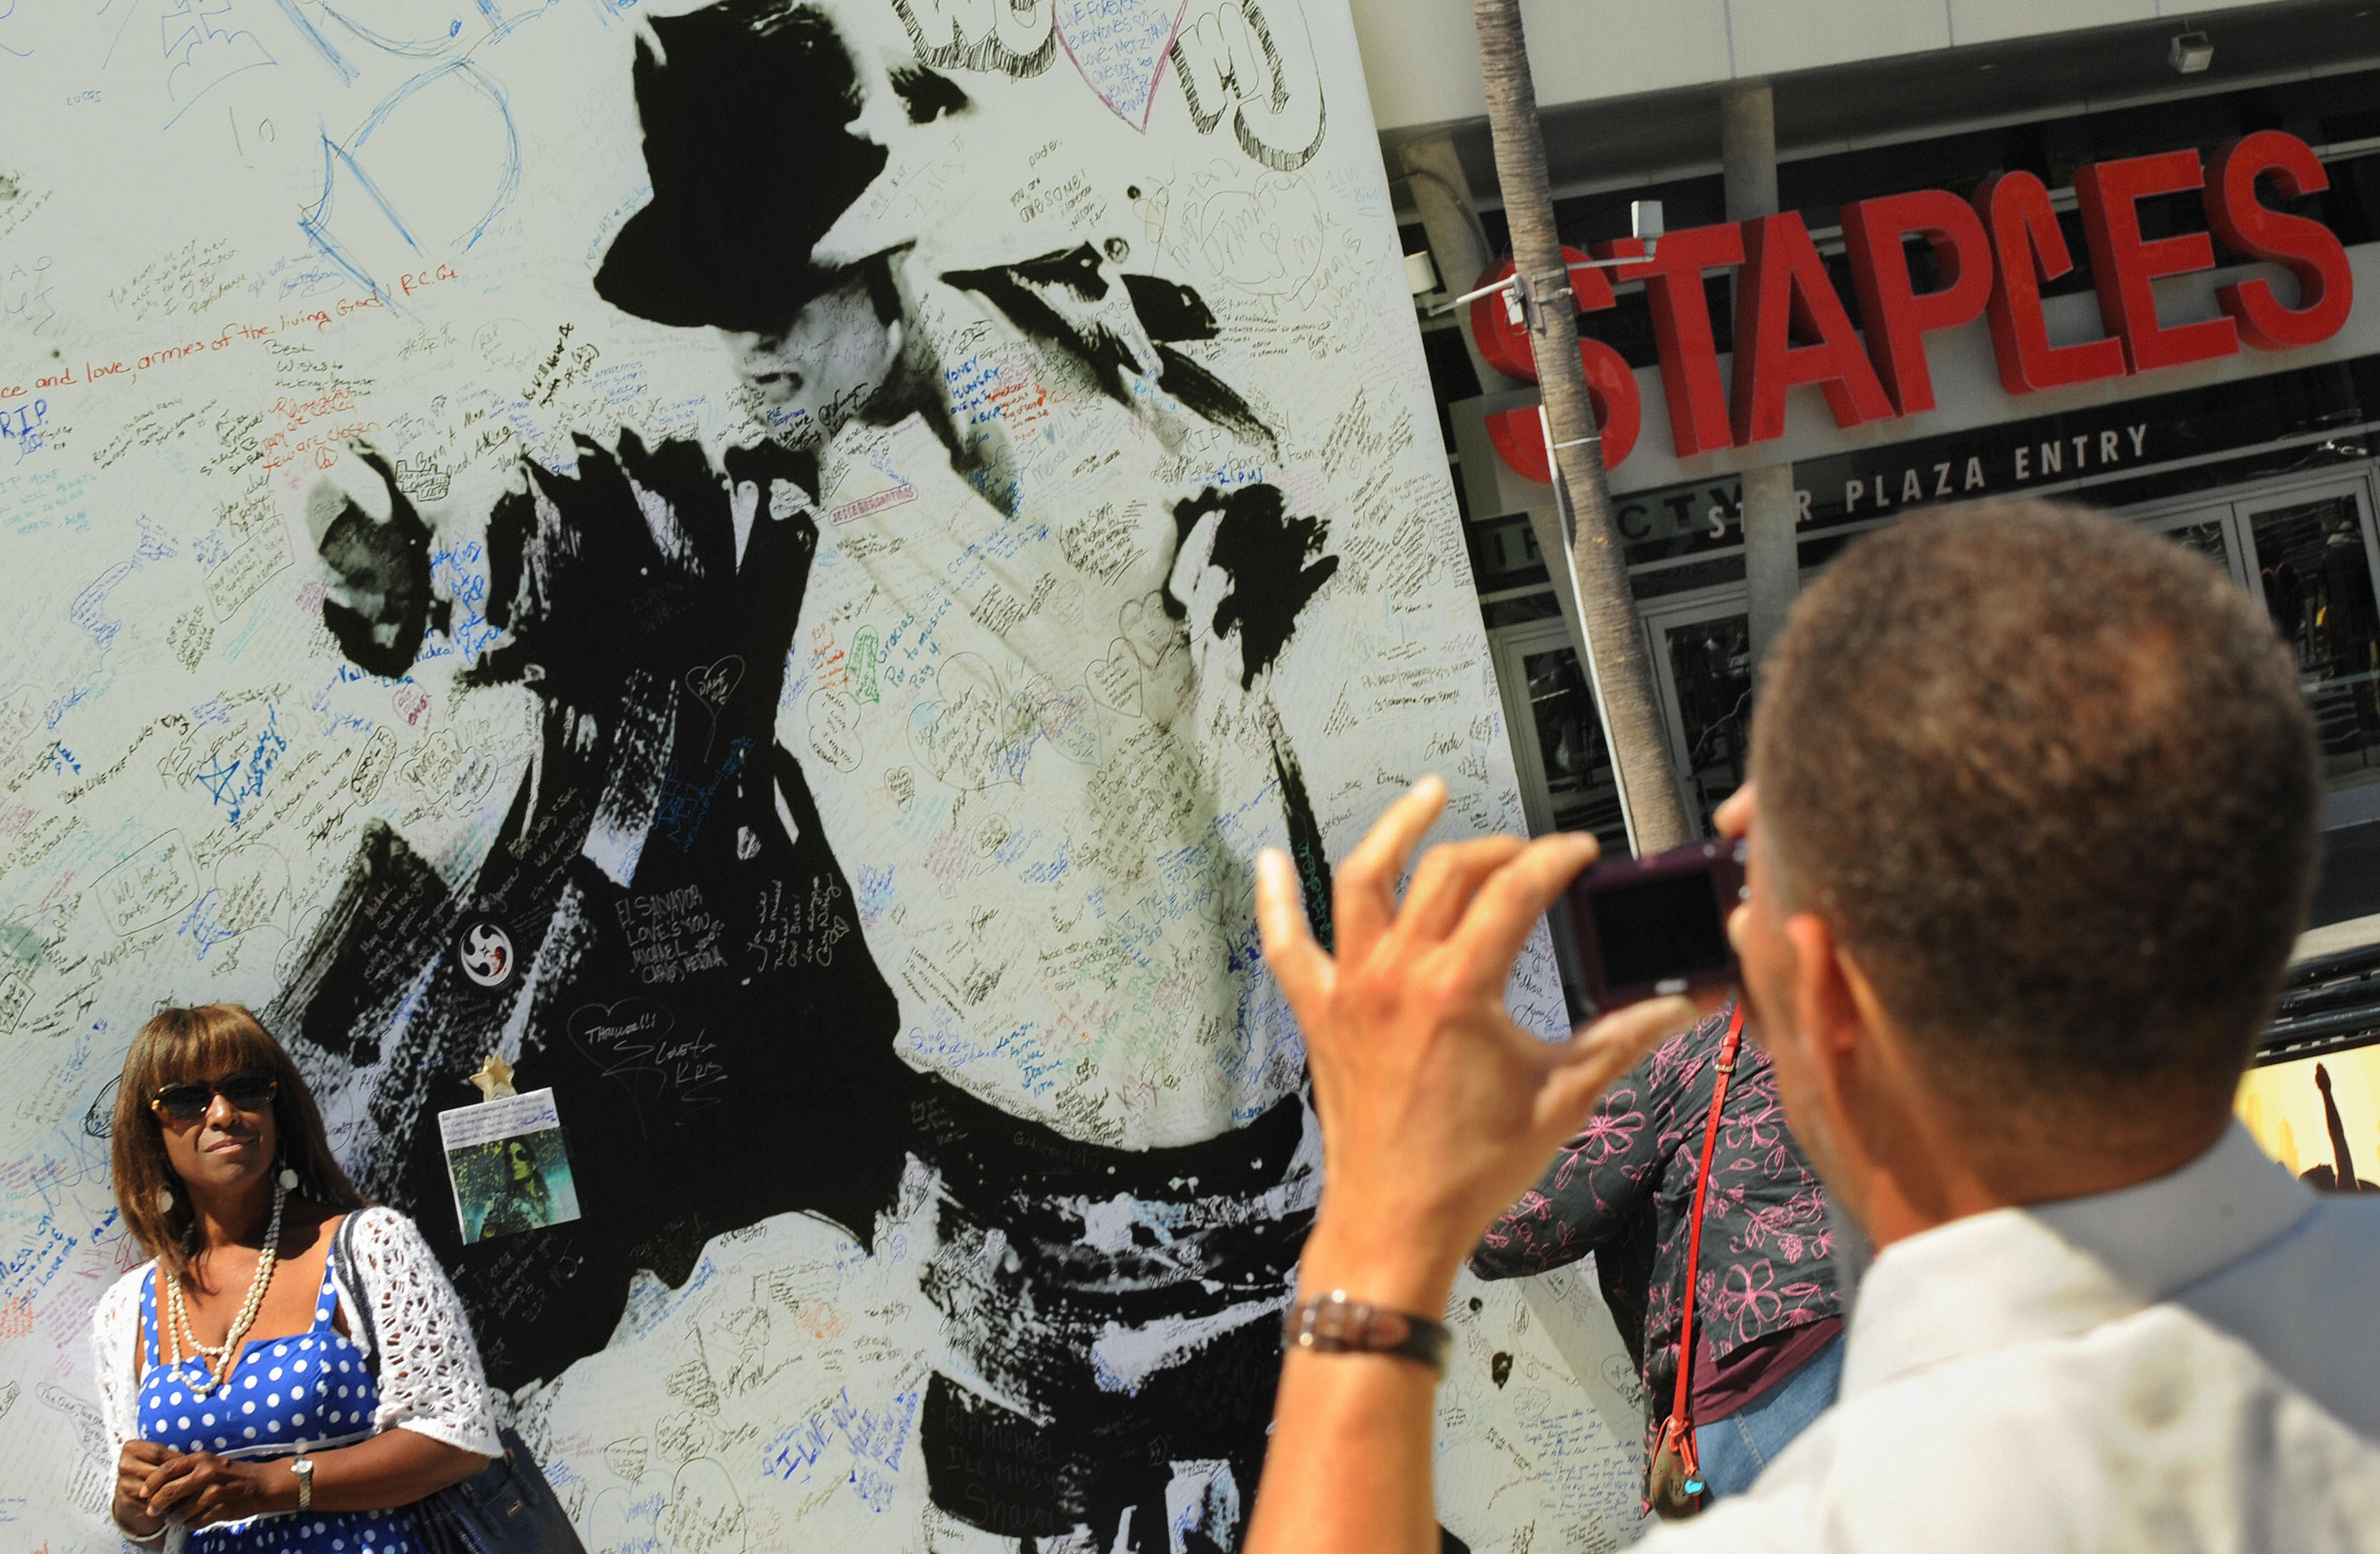 (Getty Images) Fans take photos of a Michael Jackson billboard covered in messages outside the Staples Center in Los Angeles on July 5, 2009.